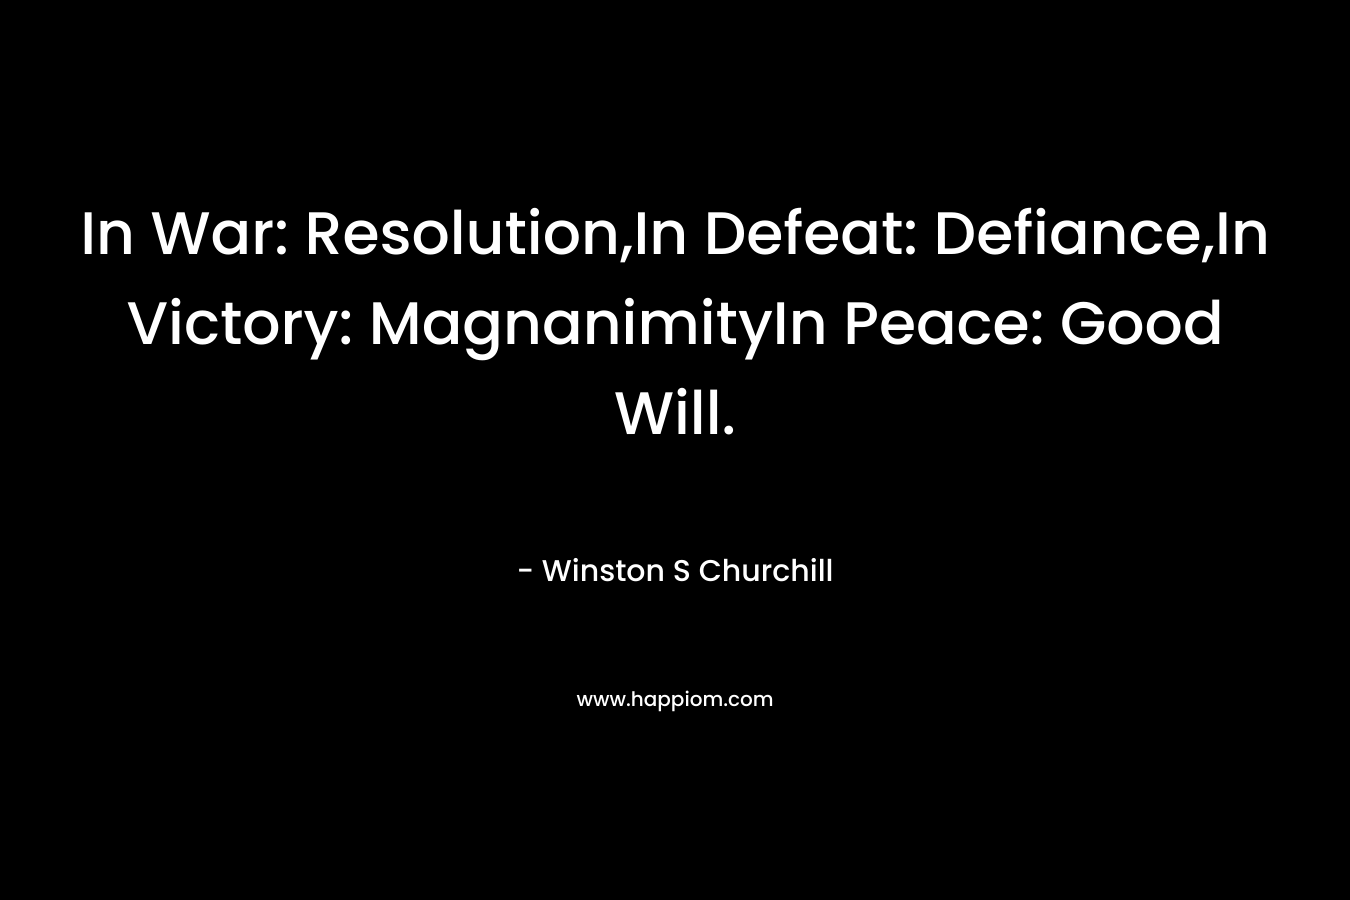 In War: Resolution,In Defeat: Defiance,In Victory: MagnanimityIn Peace: Good Will.